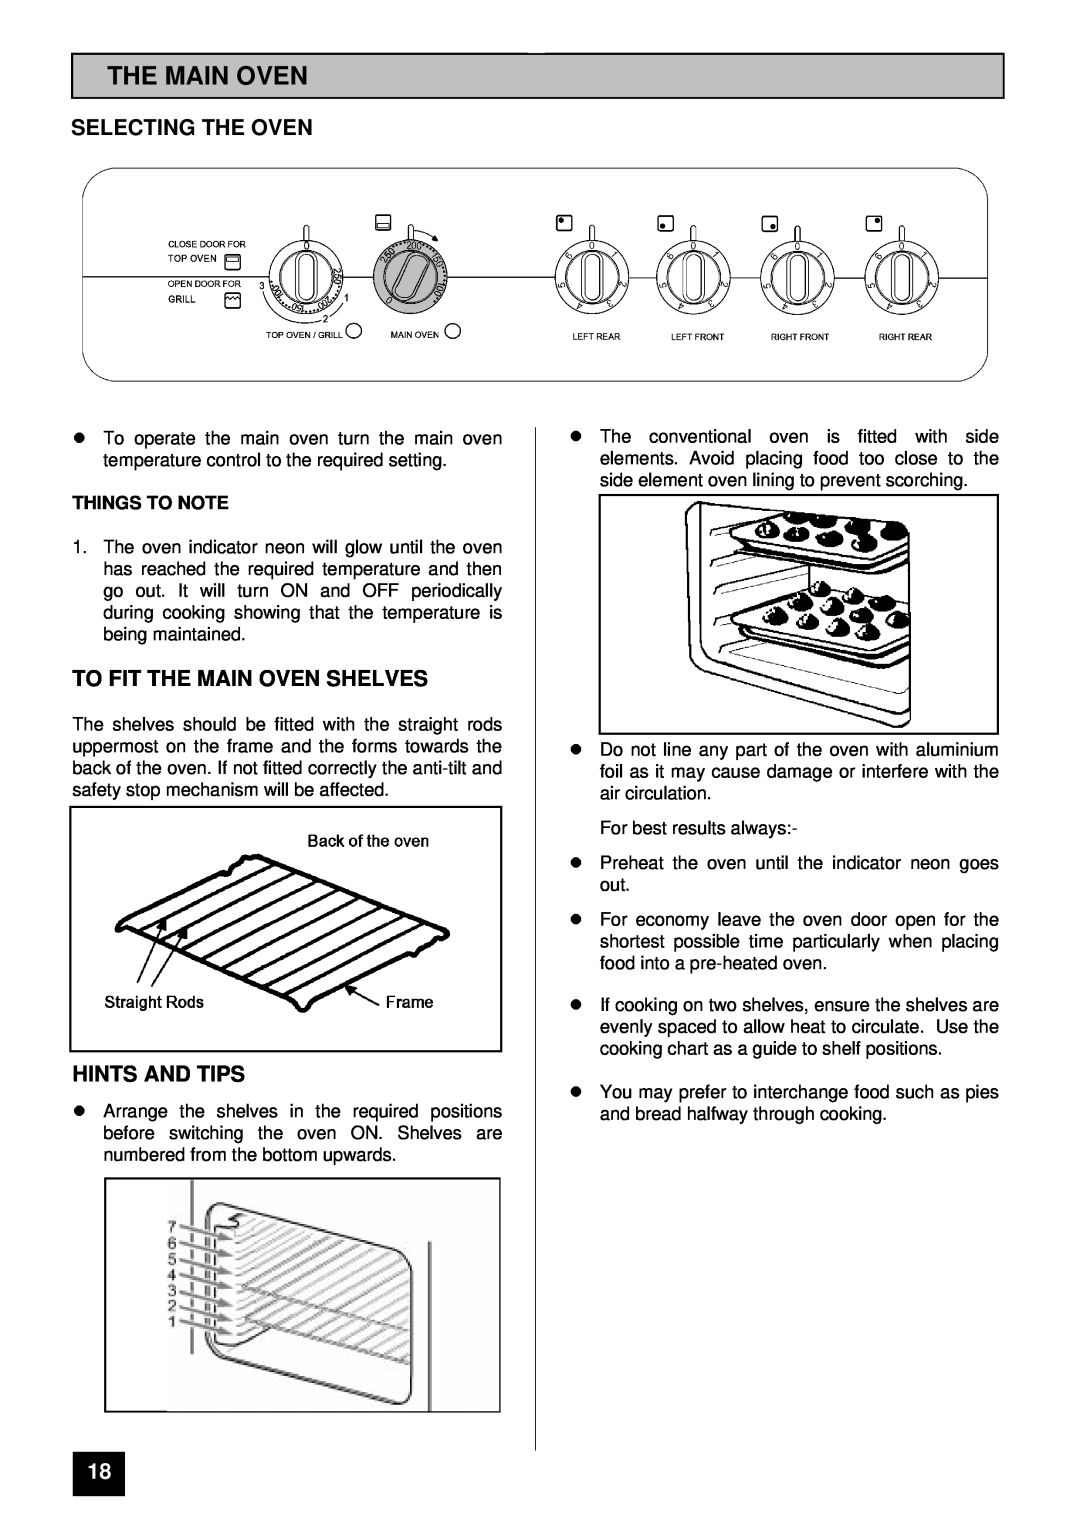 Tricity Bendix SI 055 Selecting The Oven, To Fit The Main Oven Shelves, lHINTS AND TIPS, Things To Note 